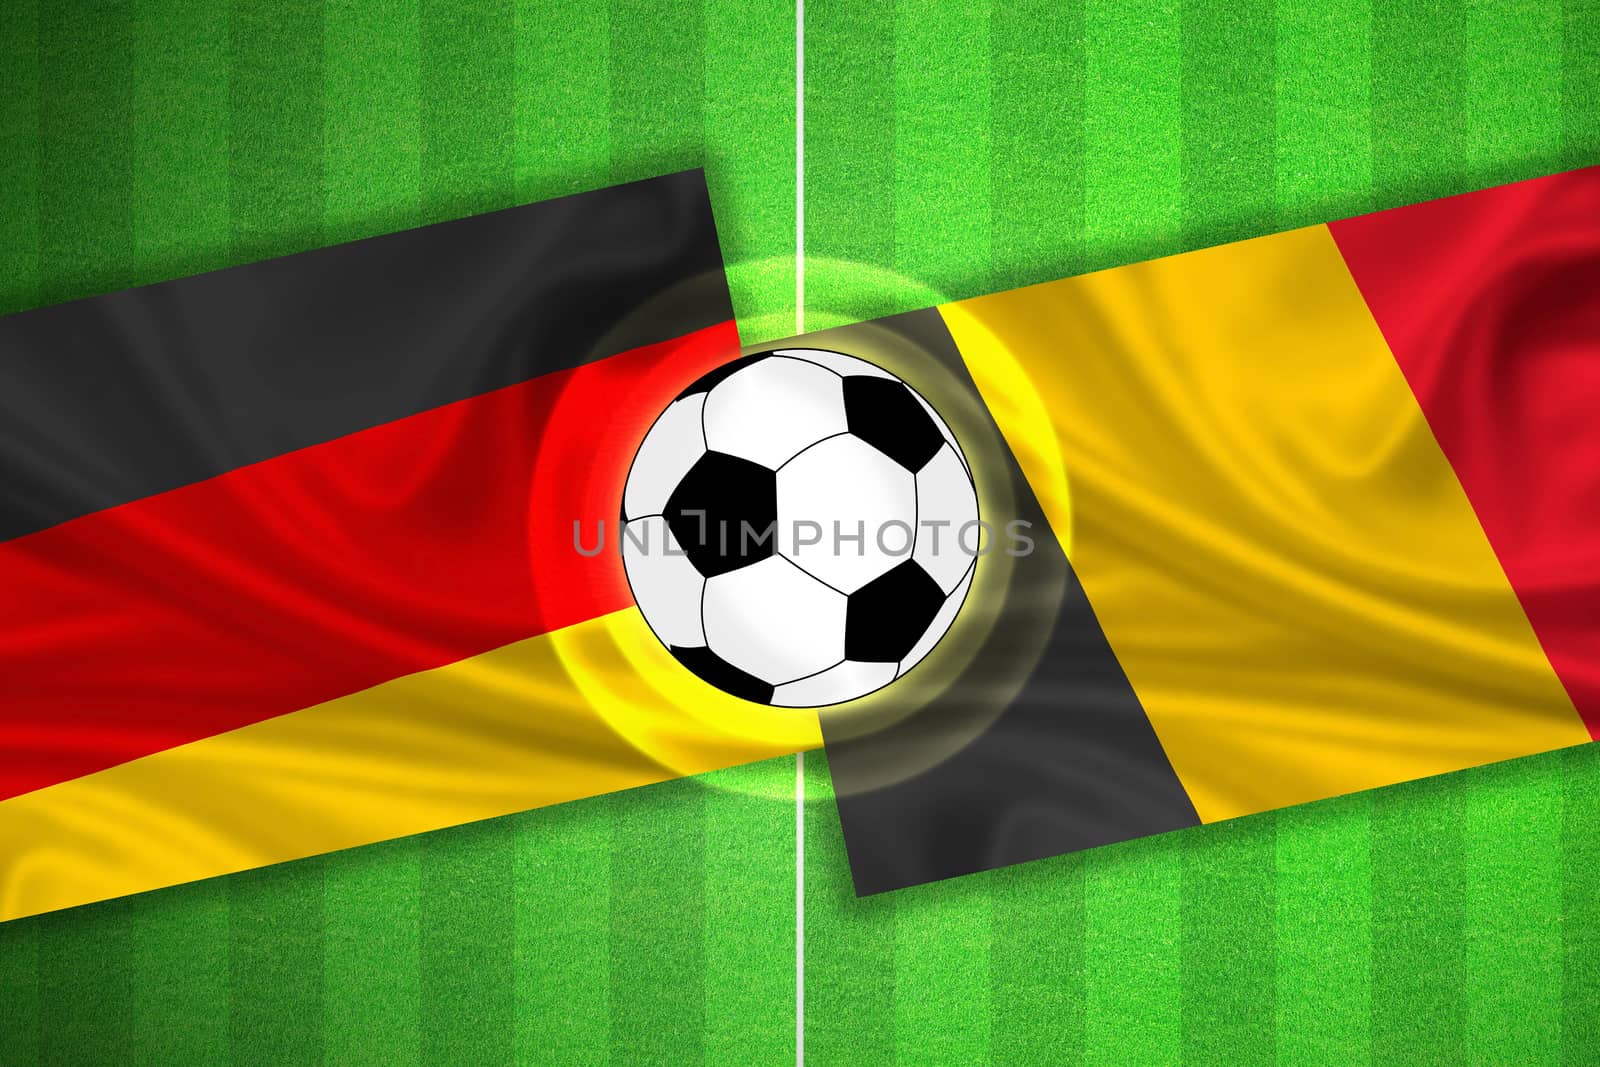 green Soccer / Football field with stripes and flags of germany - belgium, and ball.